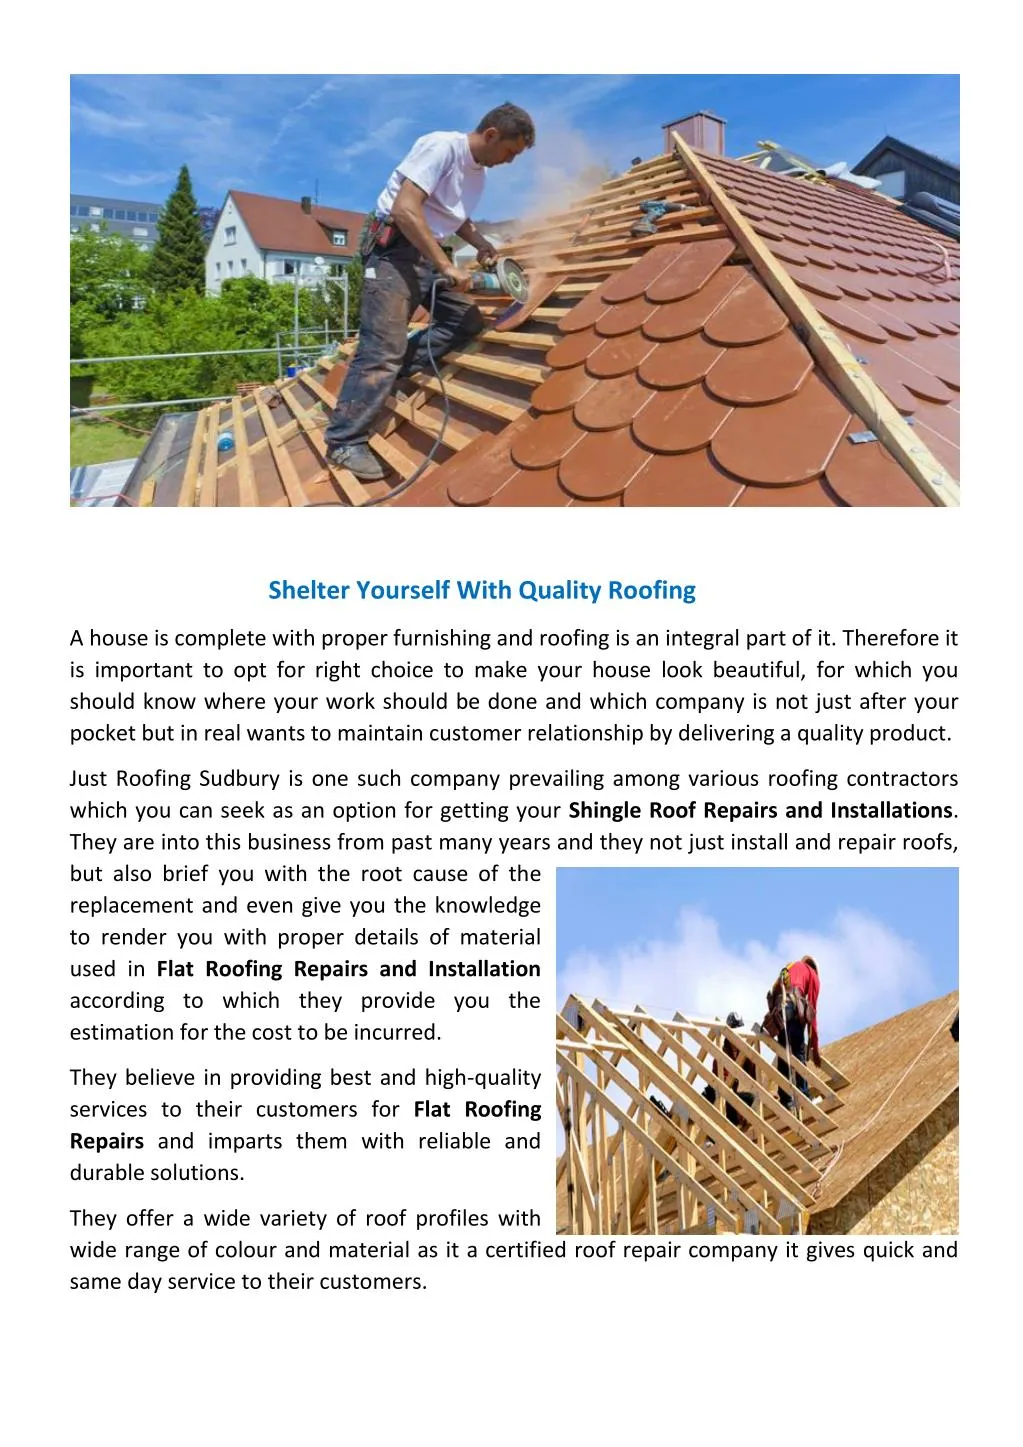 shelter yourself with quality roofing